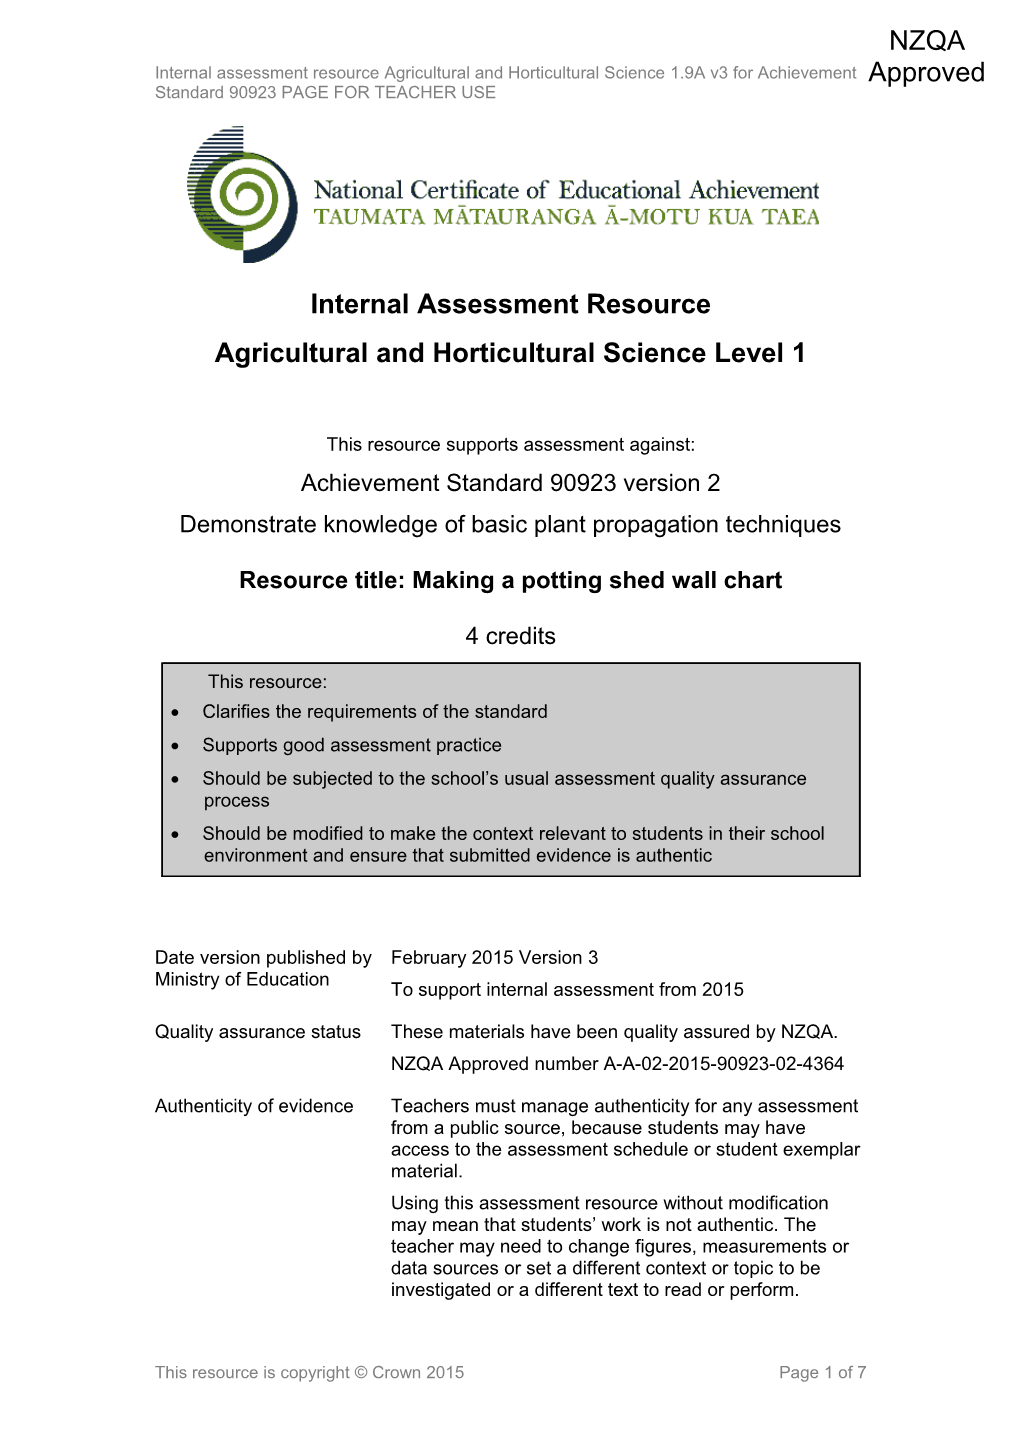 Level 1 Agricultural and Horticultural Science Internal Assessment Resource